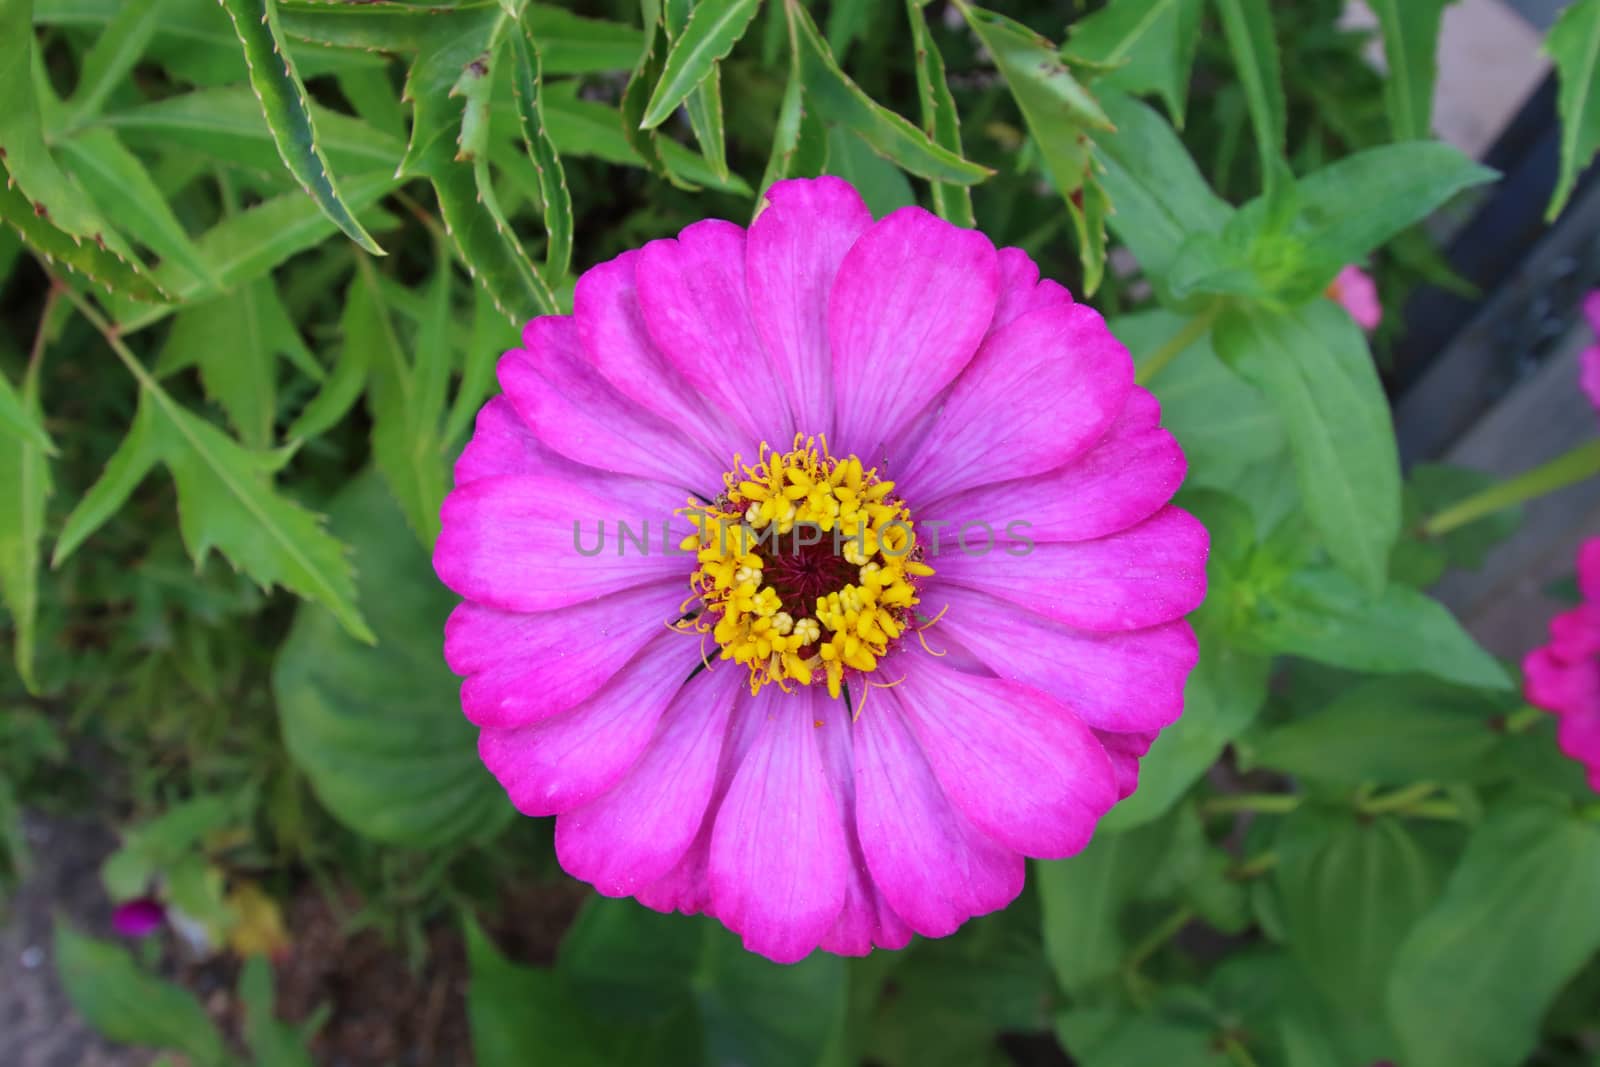 The flower name zinnia is blooming.